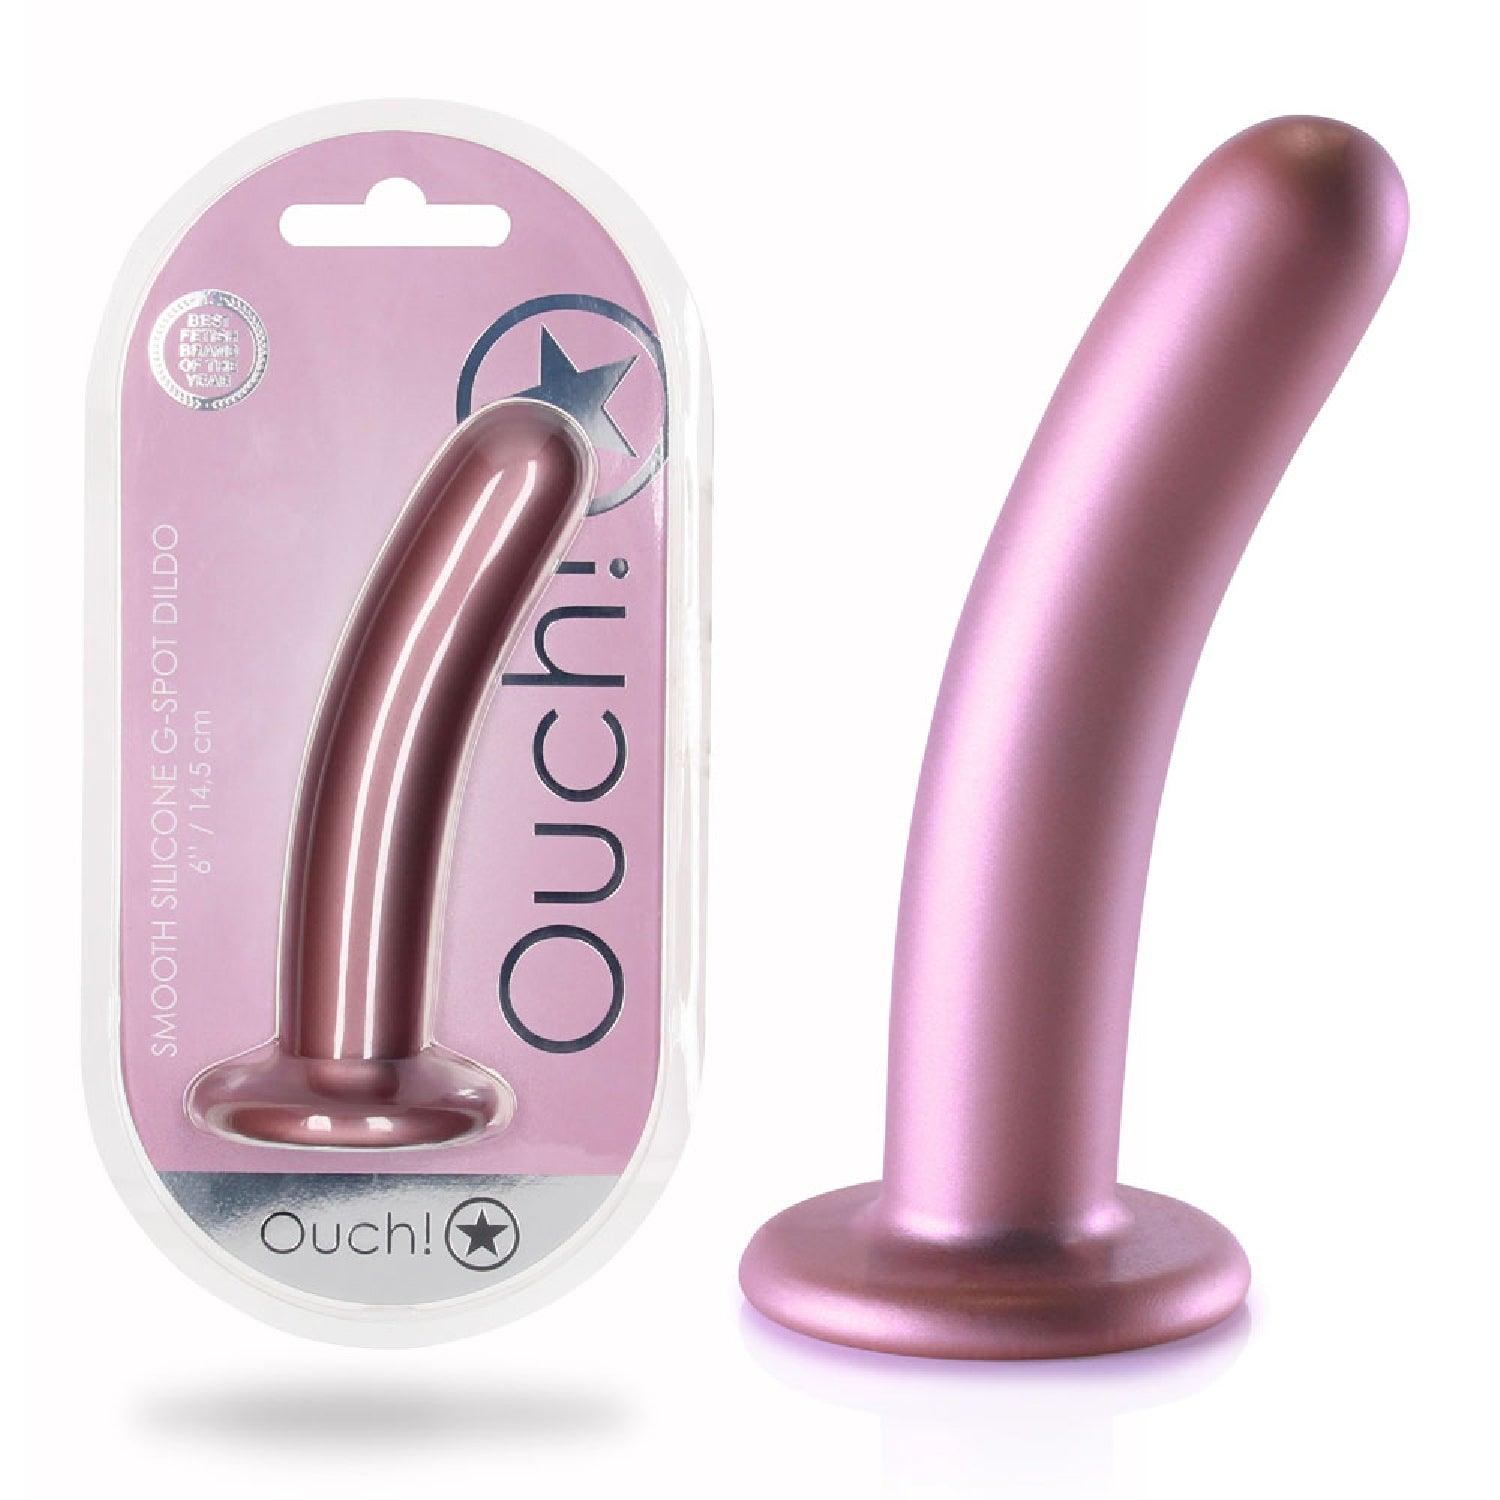 OUCH! Smooth Silicone G-Spot Dildo - 6'' / 14.5 cm - Take A Peek